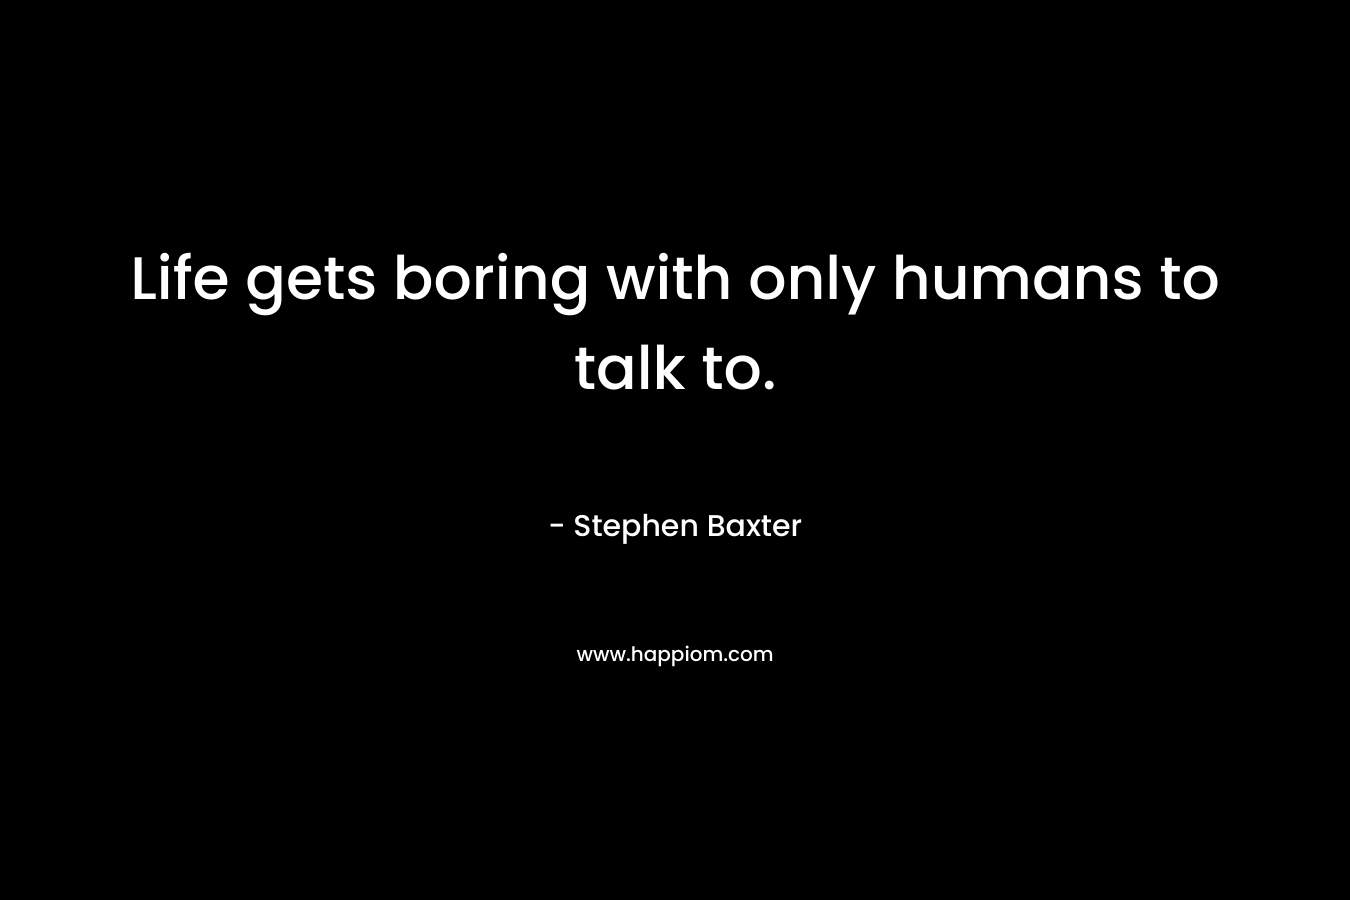 Life gets boring with only humans to talk to.